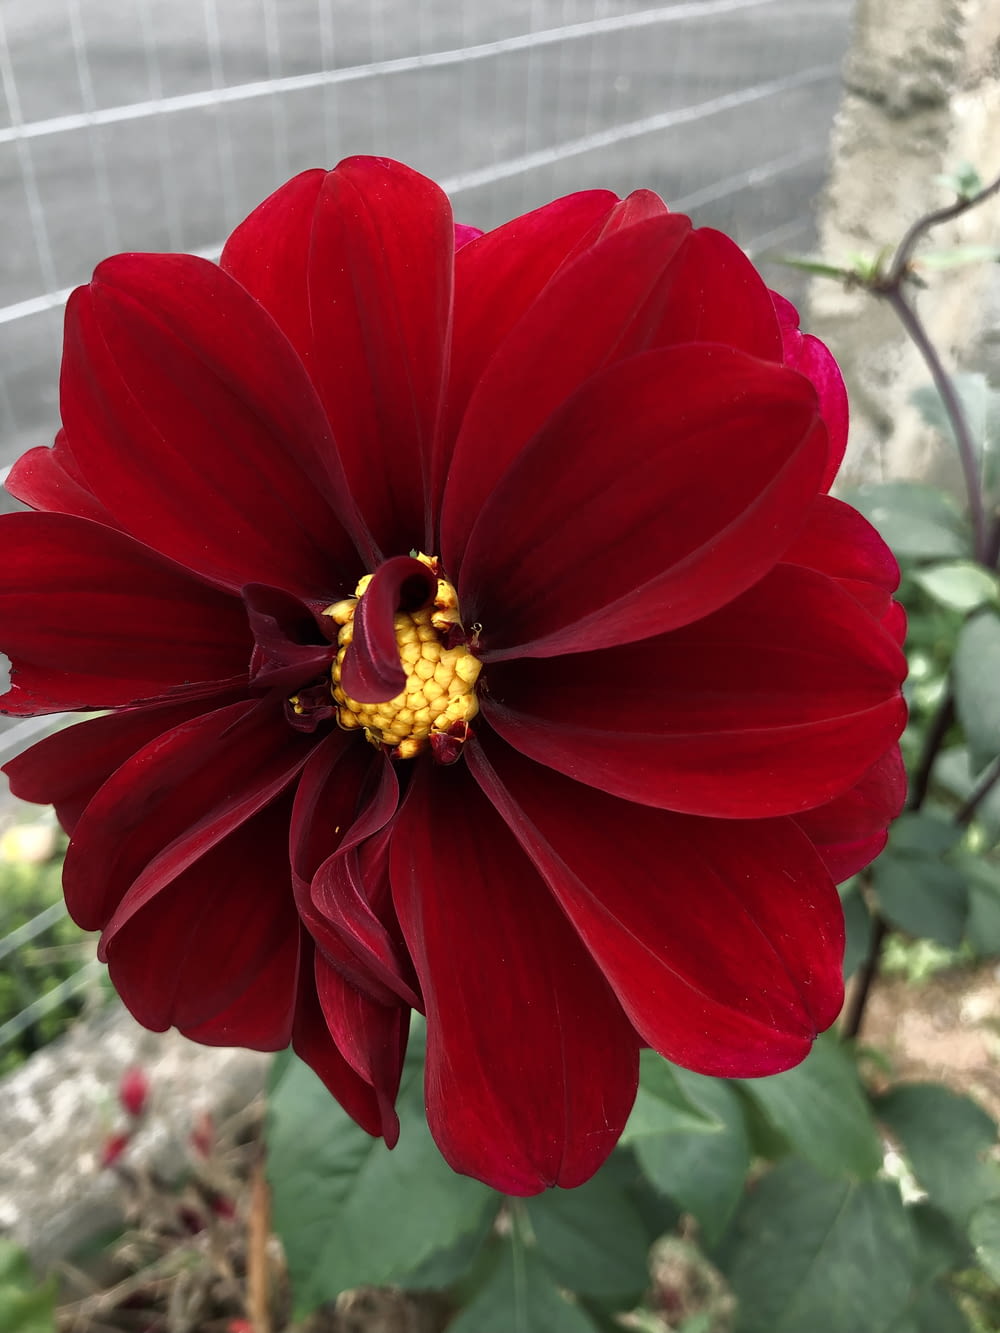 a red flower with a yellow center